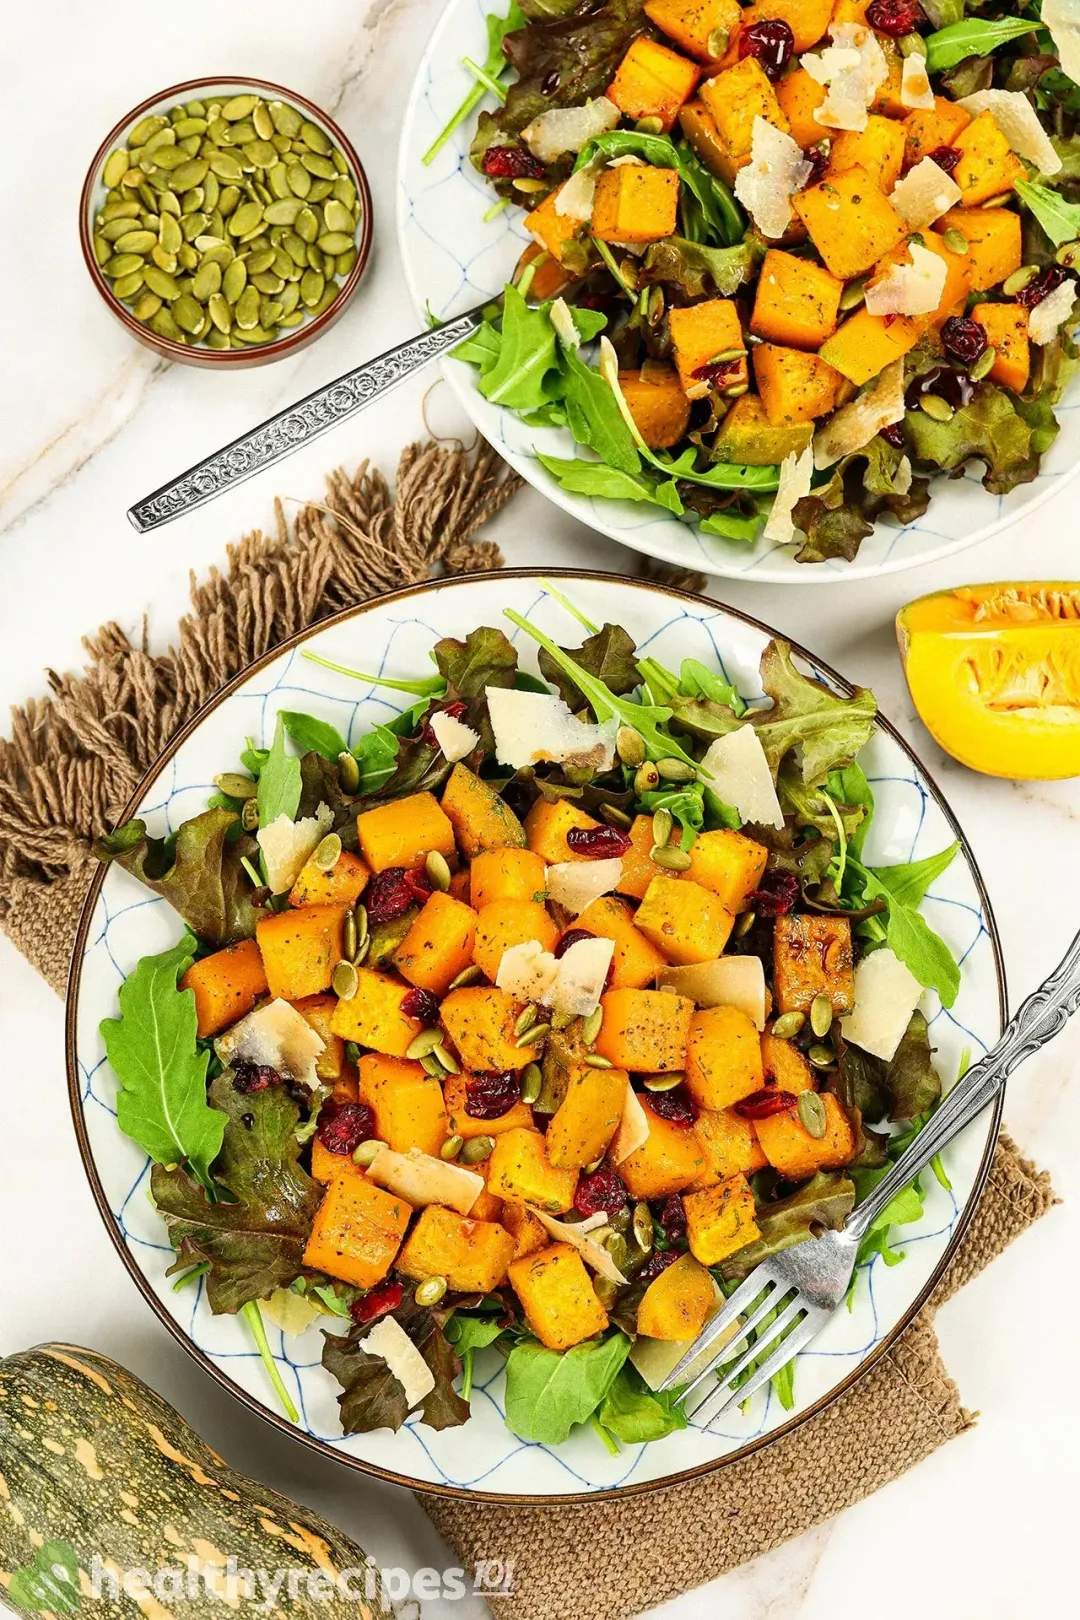 How to Peel and Cut Butternut Squash for Butternut Squash Salad